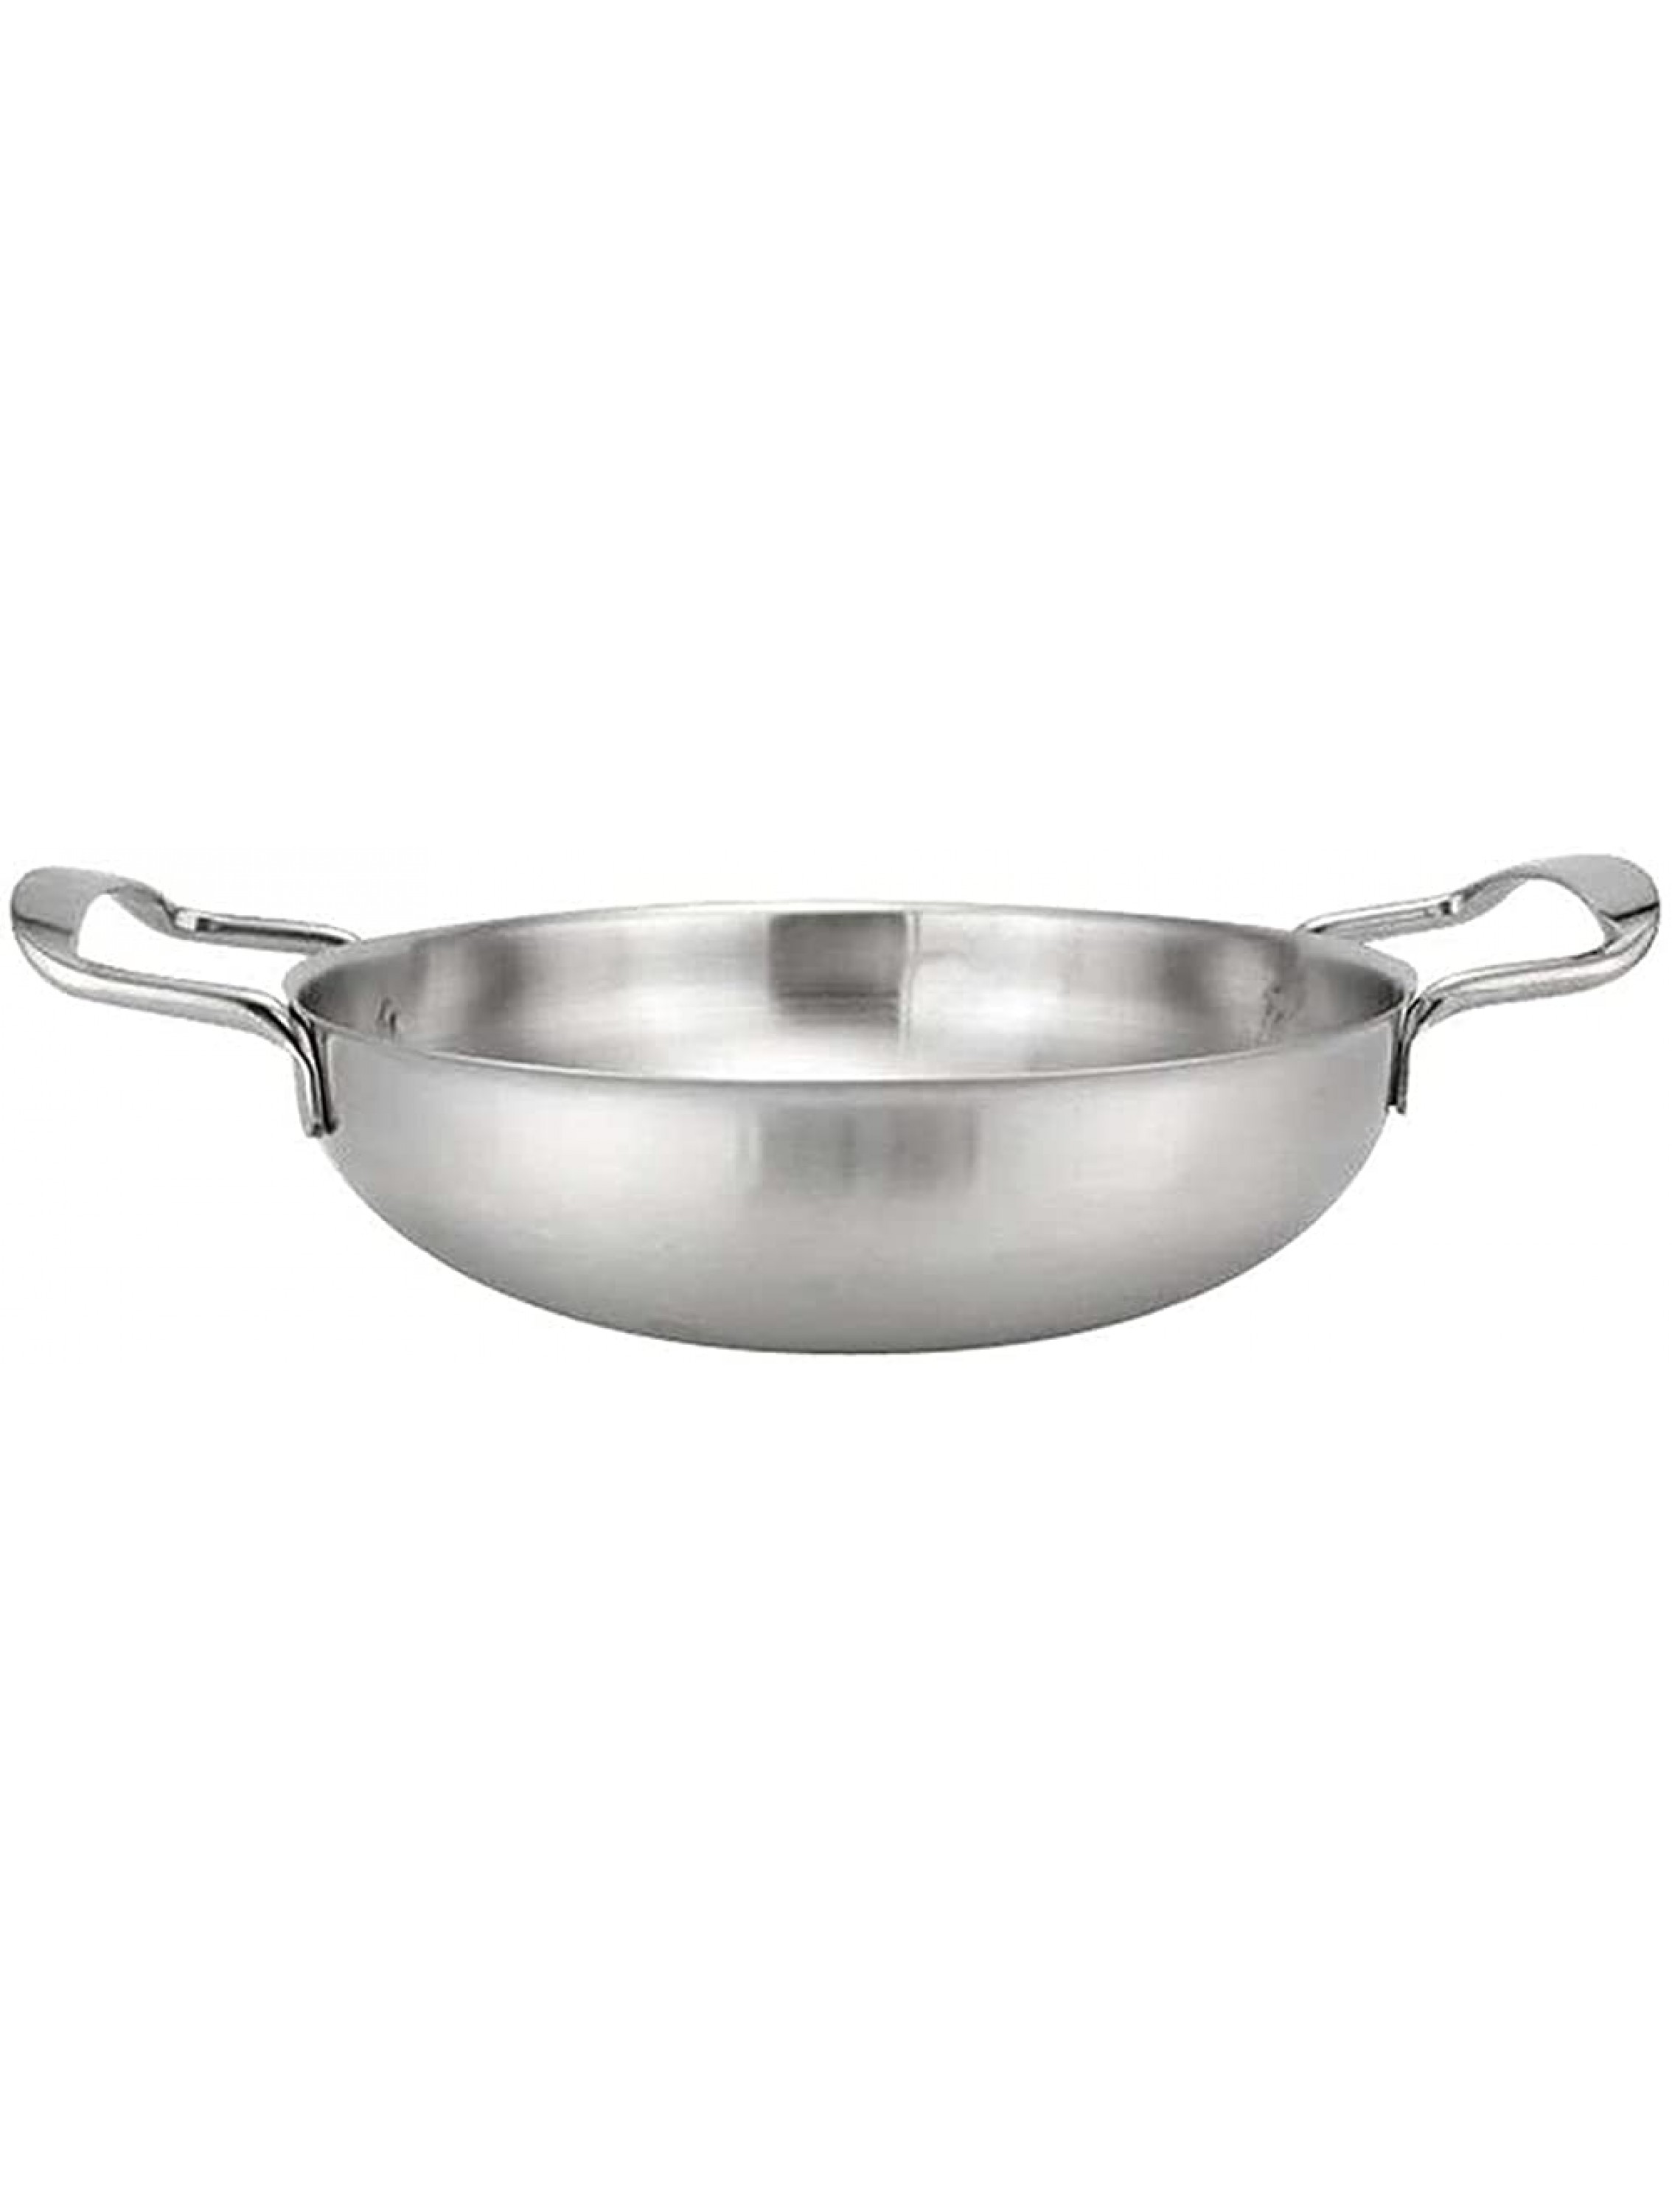 Chef's Pans Stainless Steel Paella Pan Seafood Cooking Pan Small Stockpot Saucepans Saucepans Color : Silver - B4VVPZ6H8